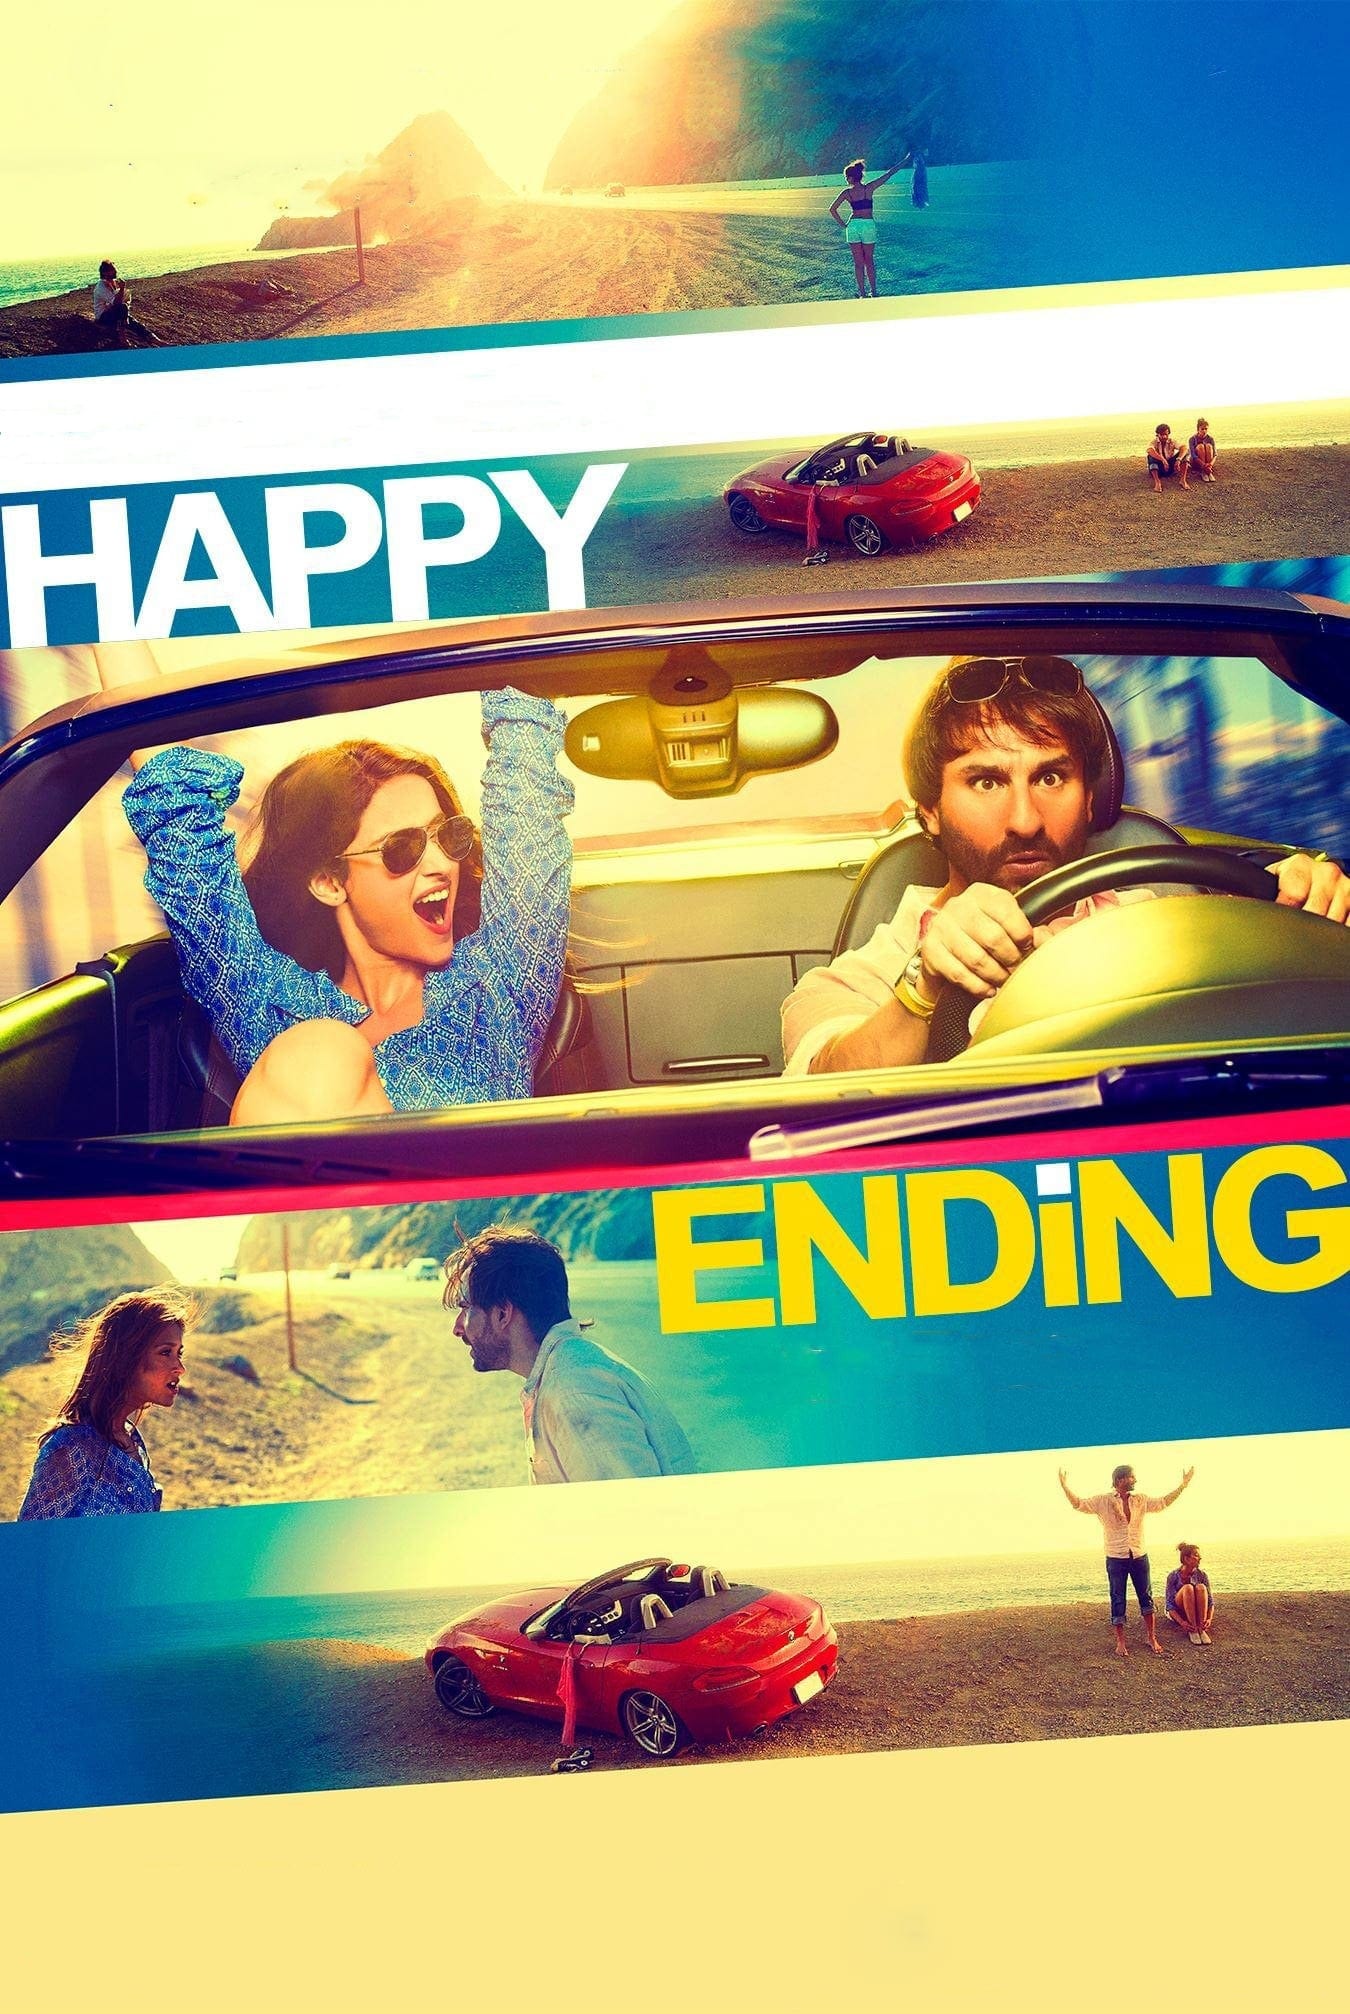 Poster for the movie "Happy Ending"